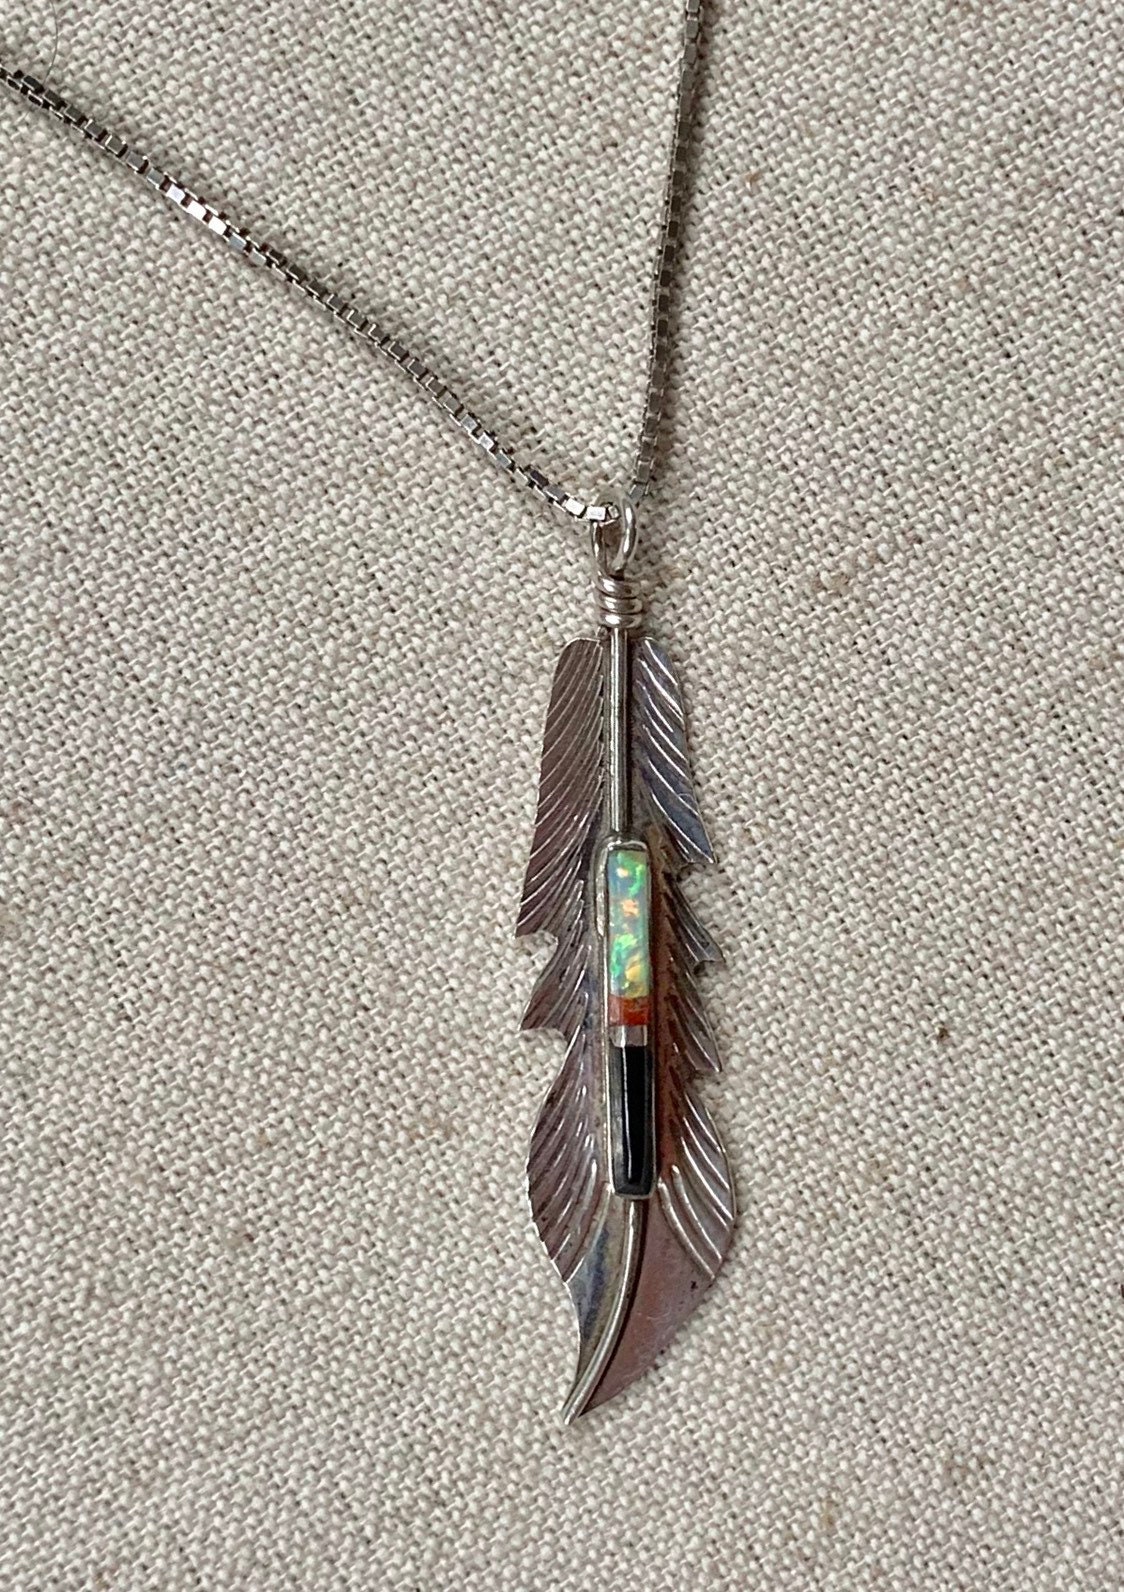 Navajo Feather Pendant Necklace Sterling Silver Opal Coral Black Onyx ...